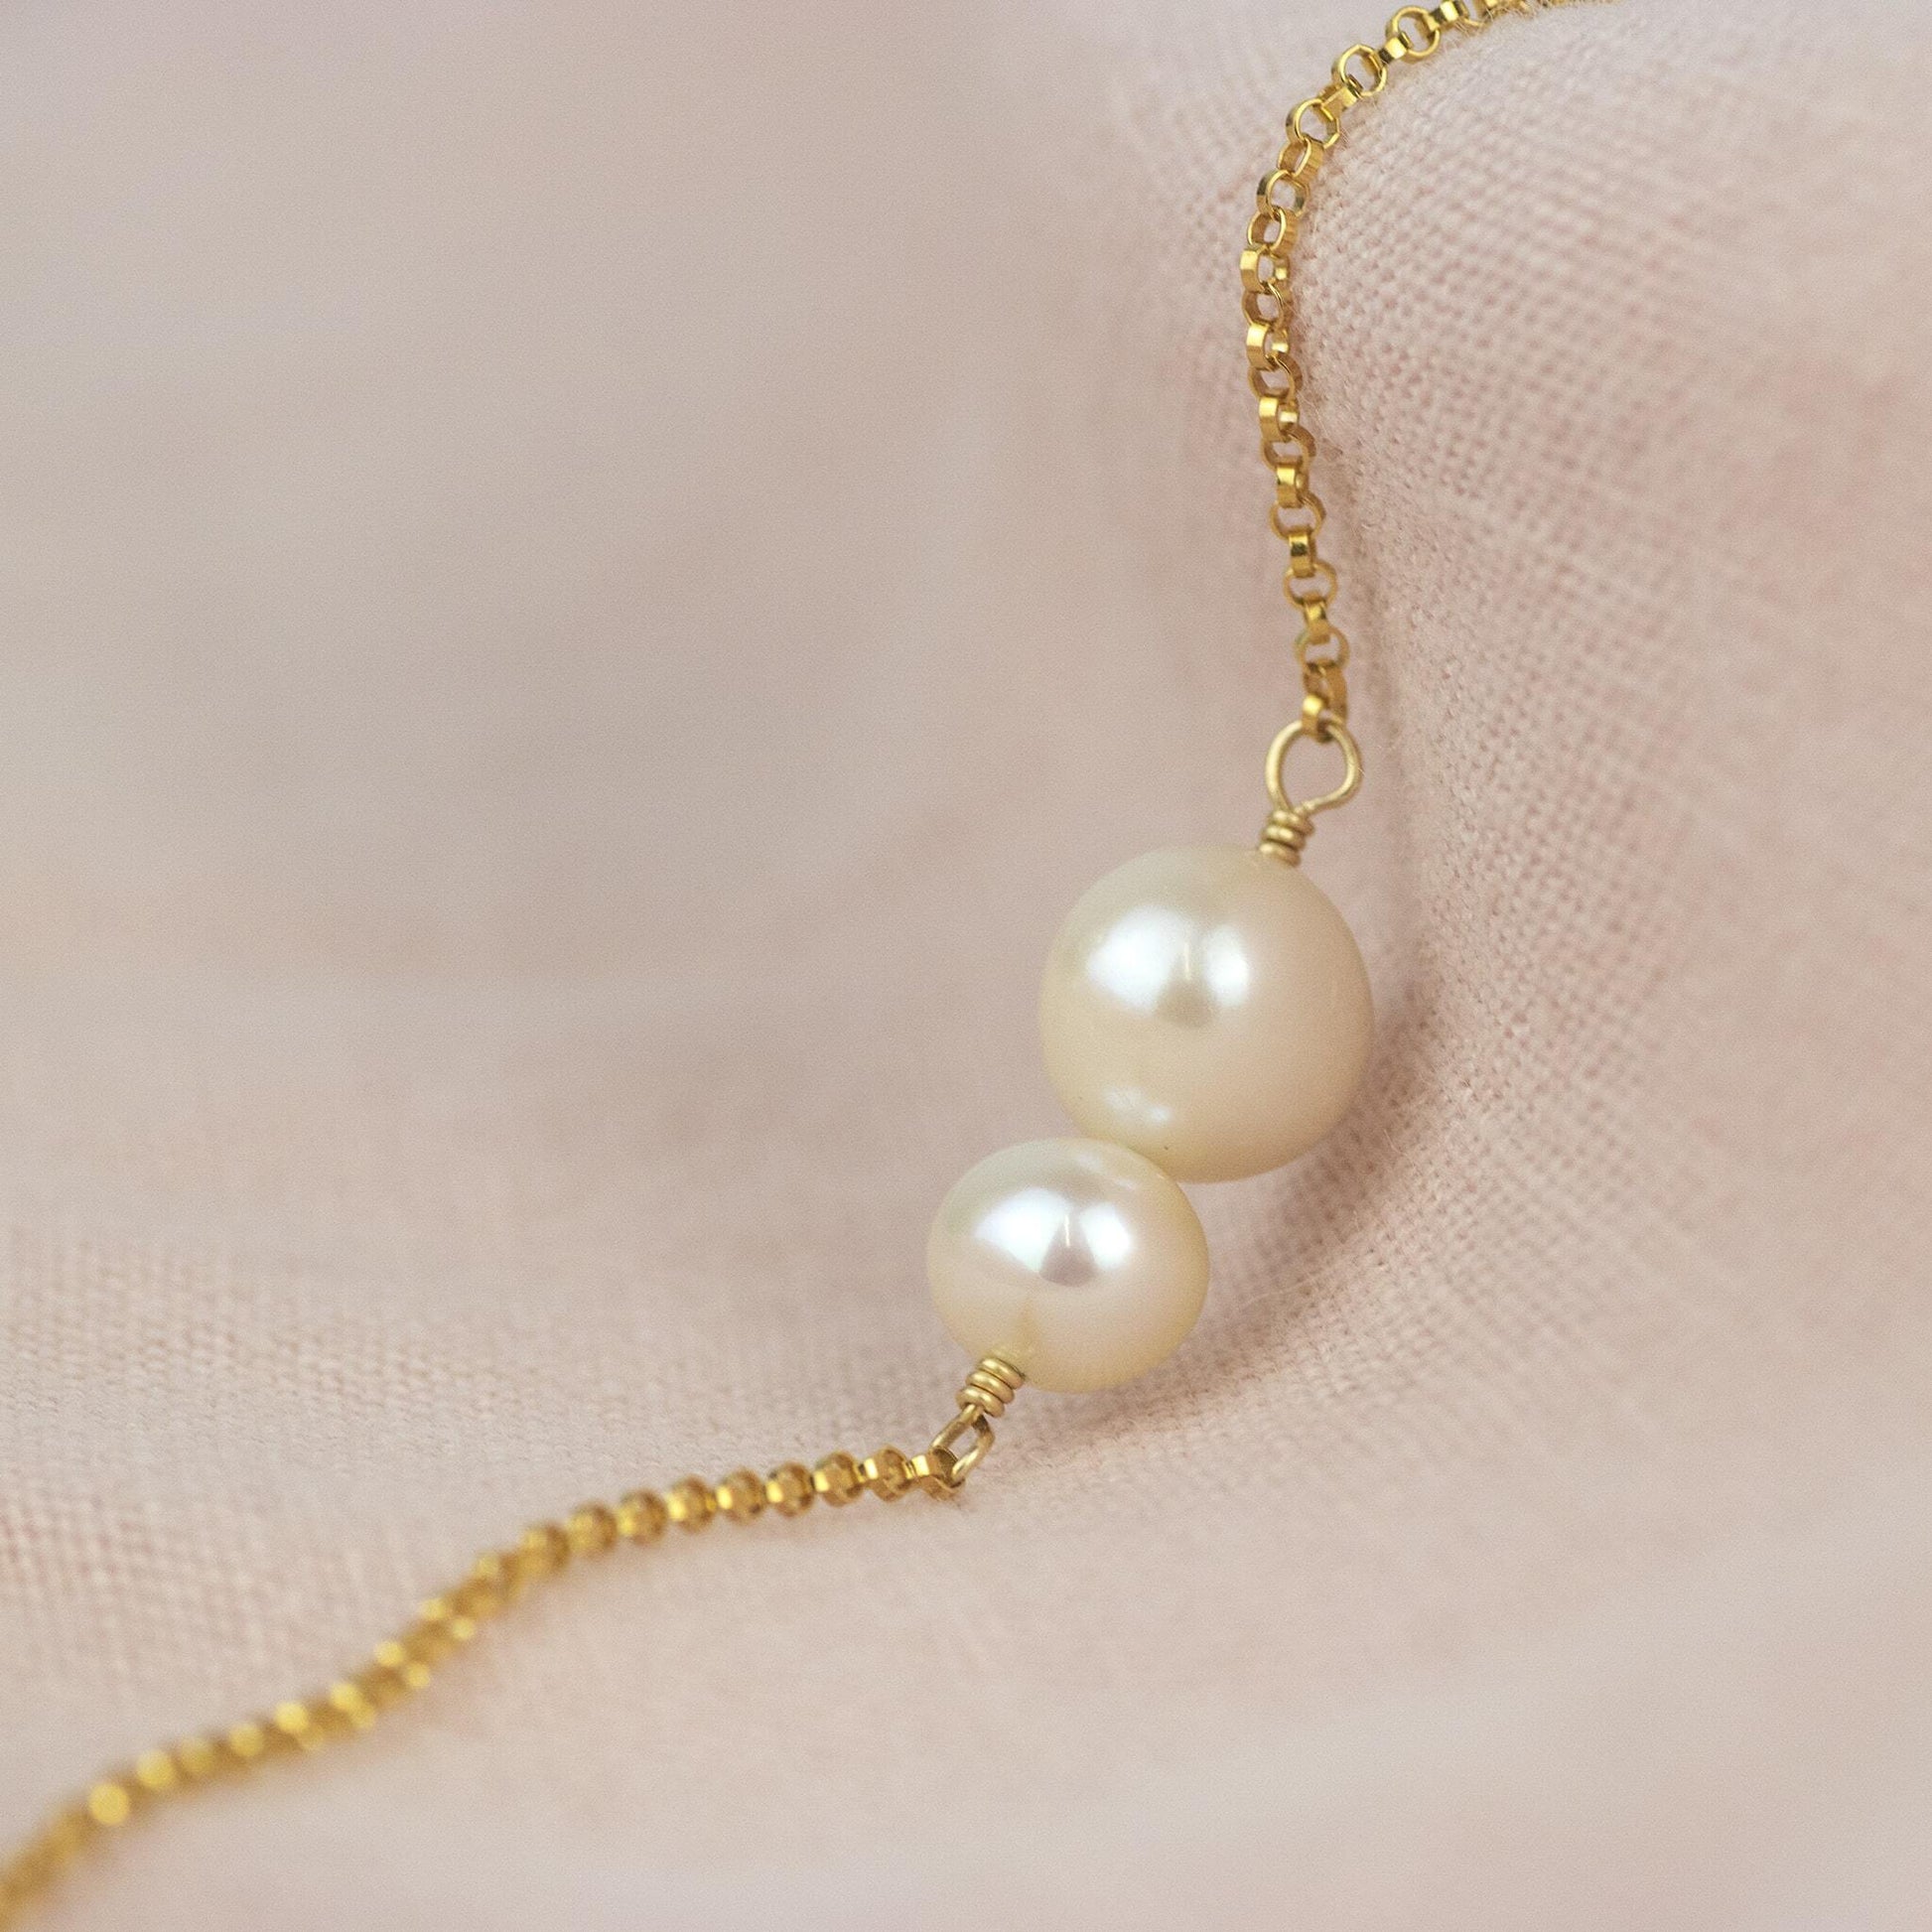 Double Pearl Bracelet - Two Pearls for Two Loved Ones